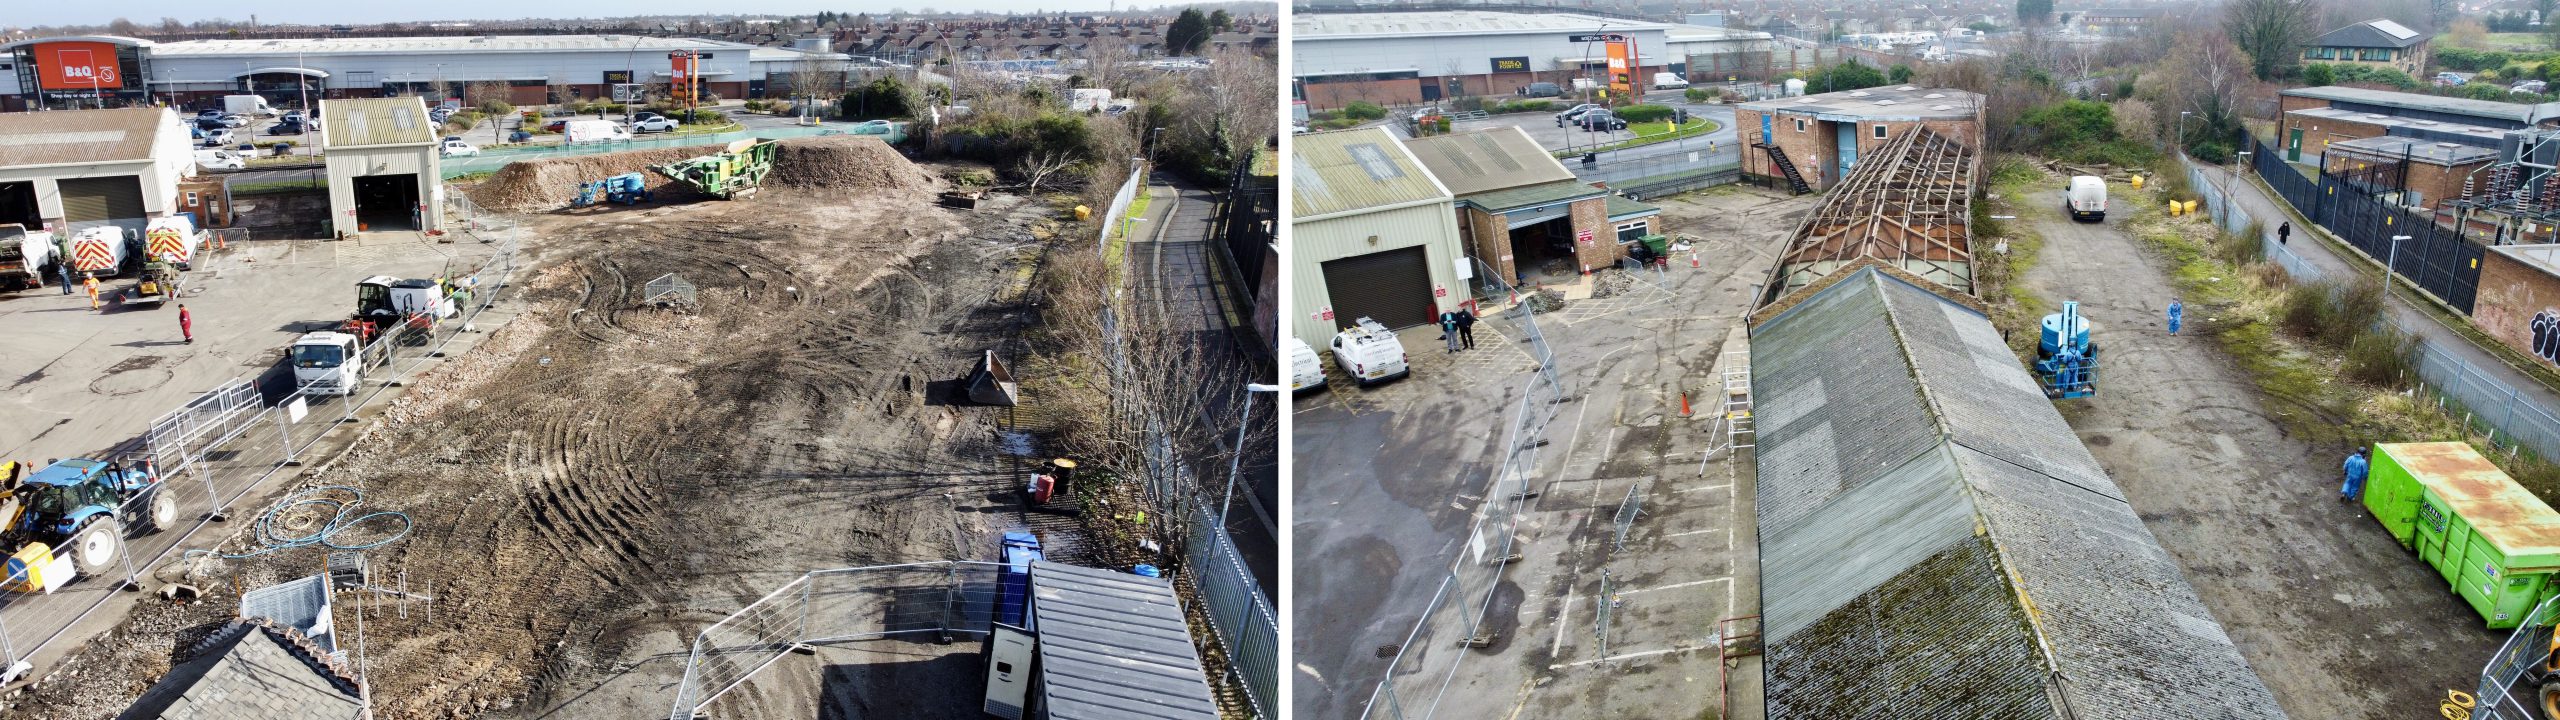 Doughty Road depot before and after February and March 2022